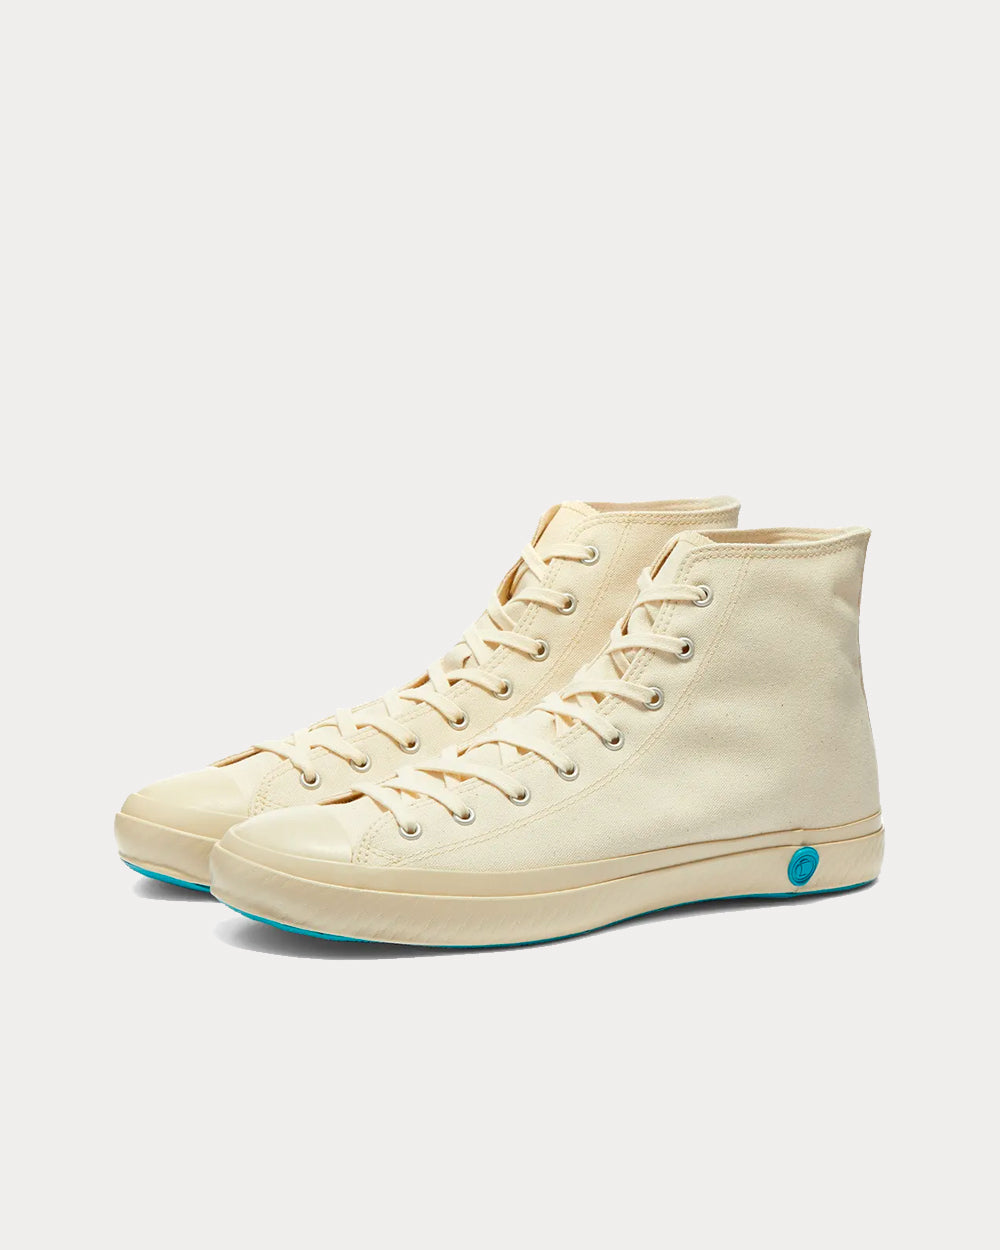 Shoes Like Pottery - 01JP White High Top Sneakers